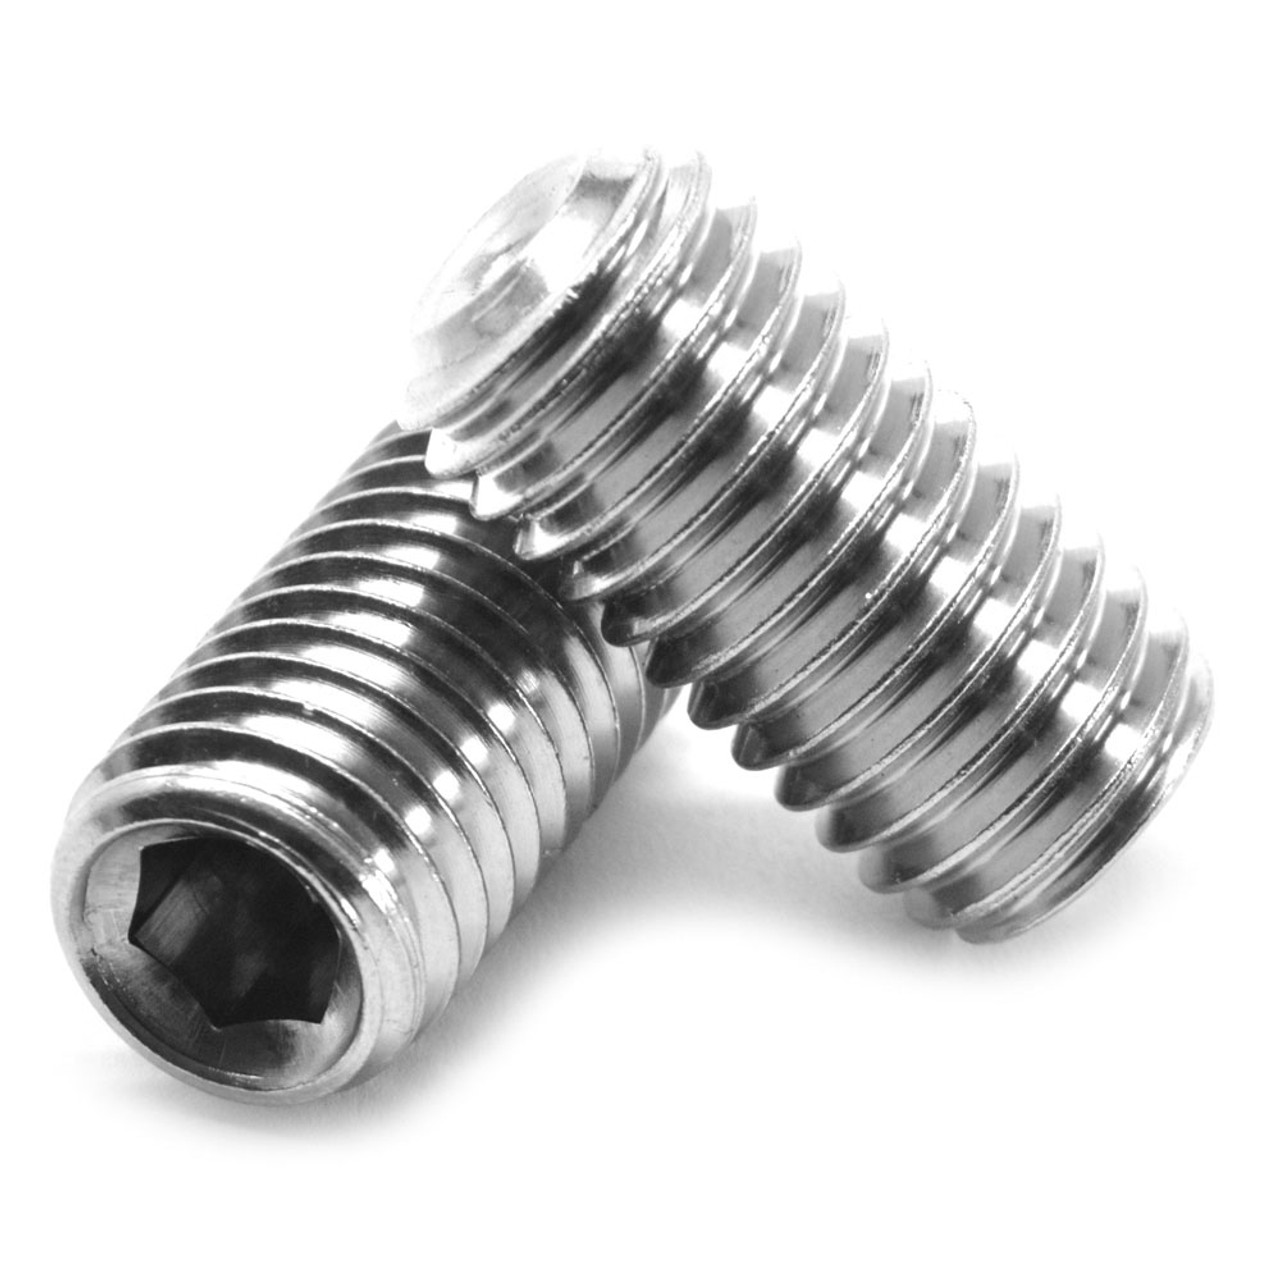 M10 x 1.50 x 60 MM Coarse Thread DIN 916 / ISO 4029 Socket Set Screw Cup Point Stainless Steel 316